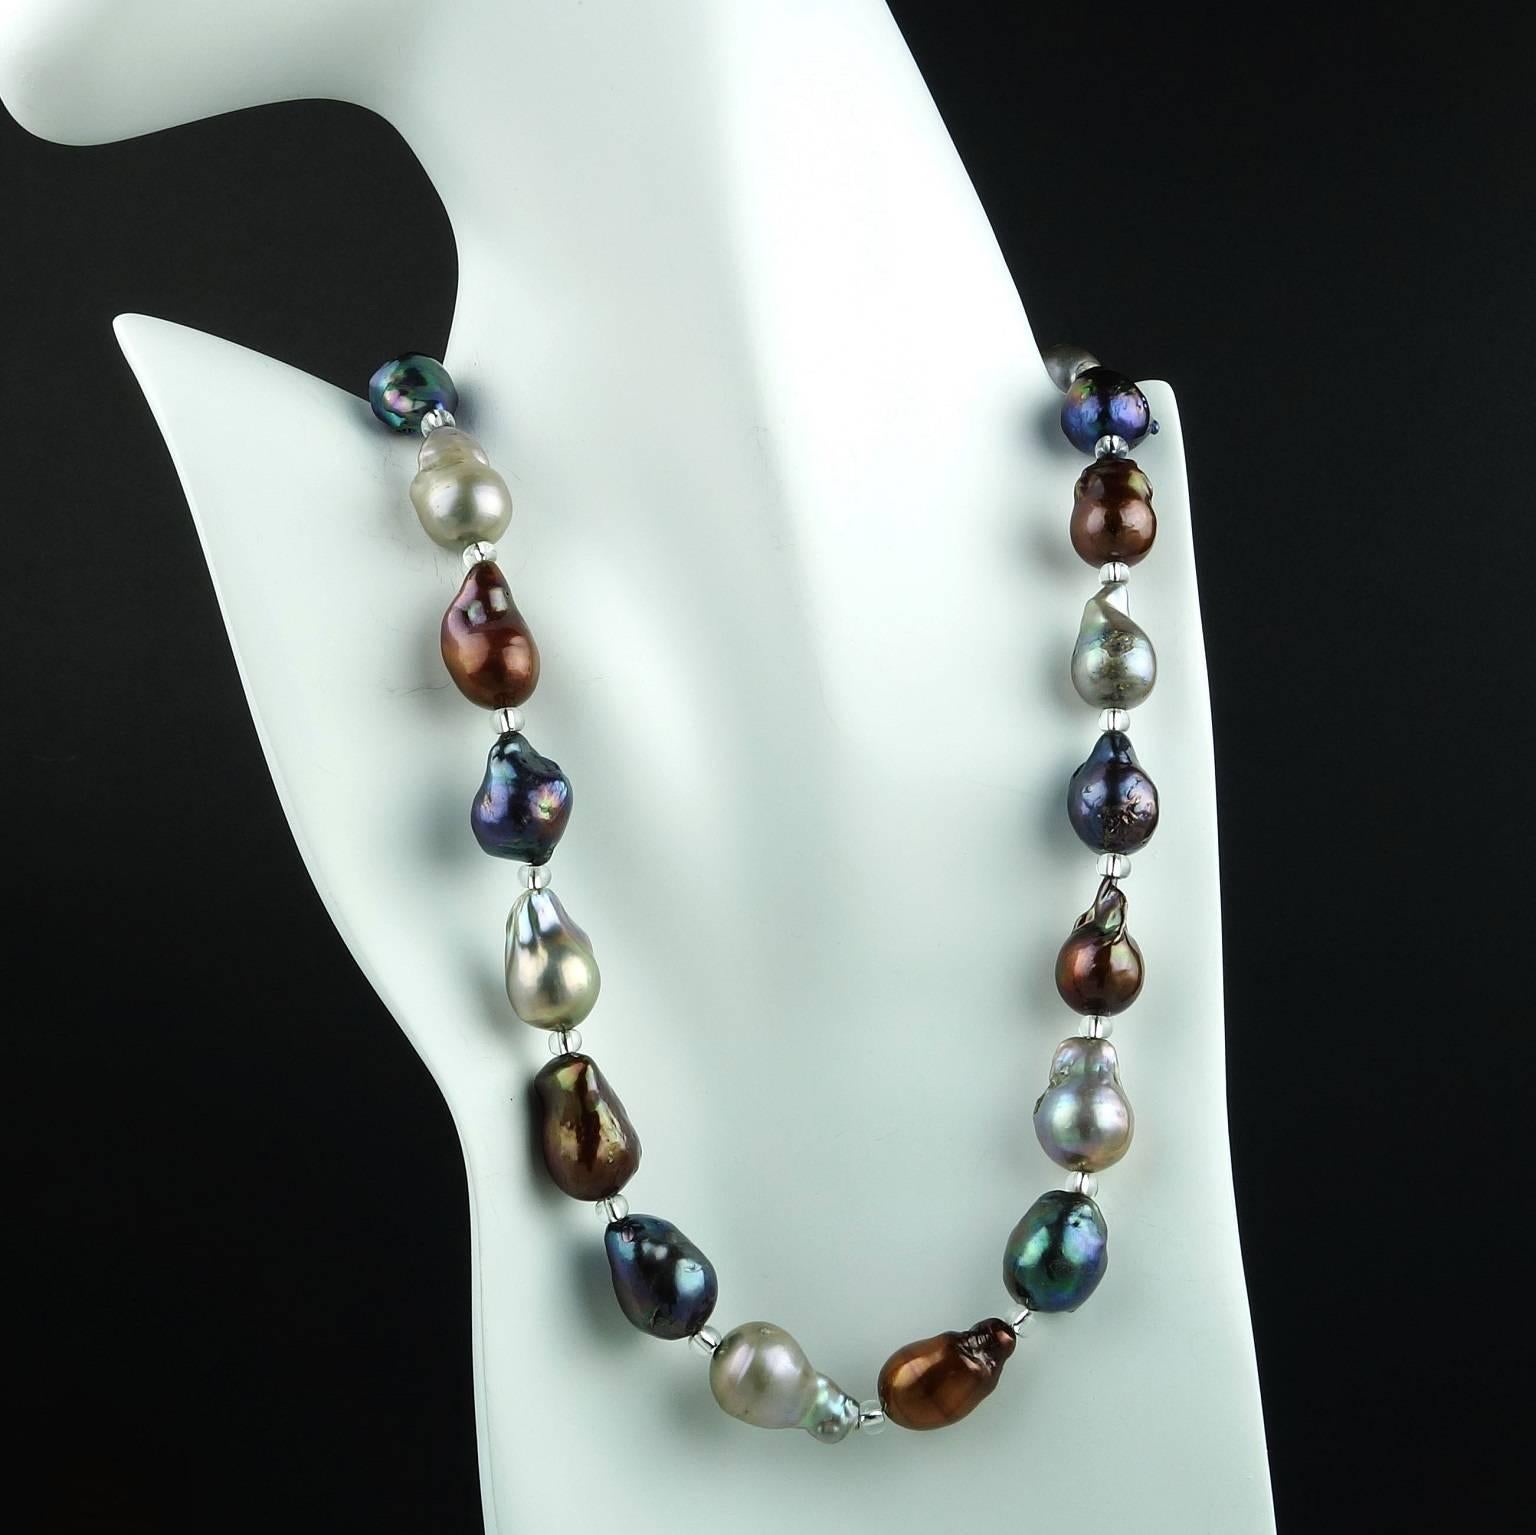 This is a Single Strand of Multi Color Freshwater Baroque Pearl Necklace in Deep rich tones of gray (with purple and teal), lighter gray, and brown. All the pearls have wonderful iridesence. They are accented with Silver Czech beads and a silver